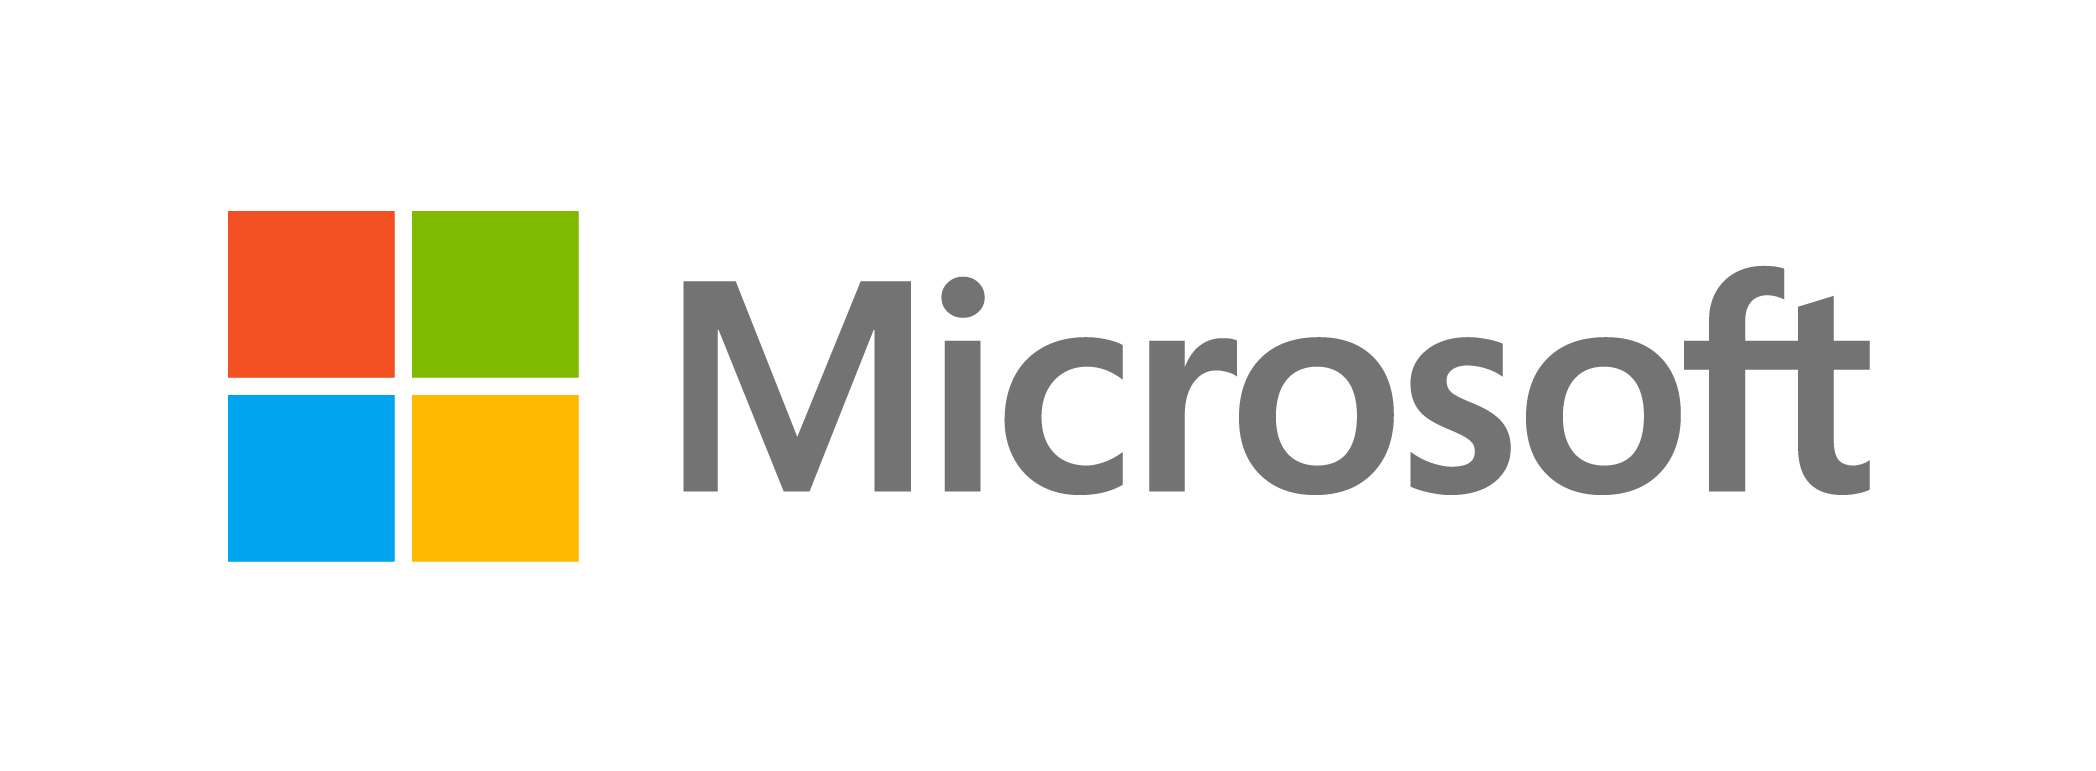 MICROSOFT Extended Hardware Service Surface Laptop 3 years (Netherlands)